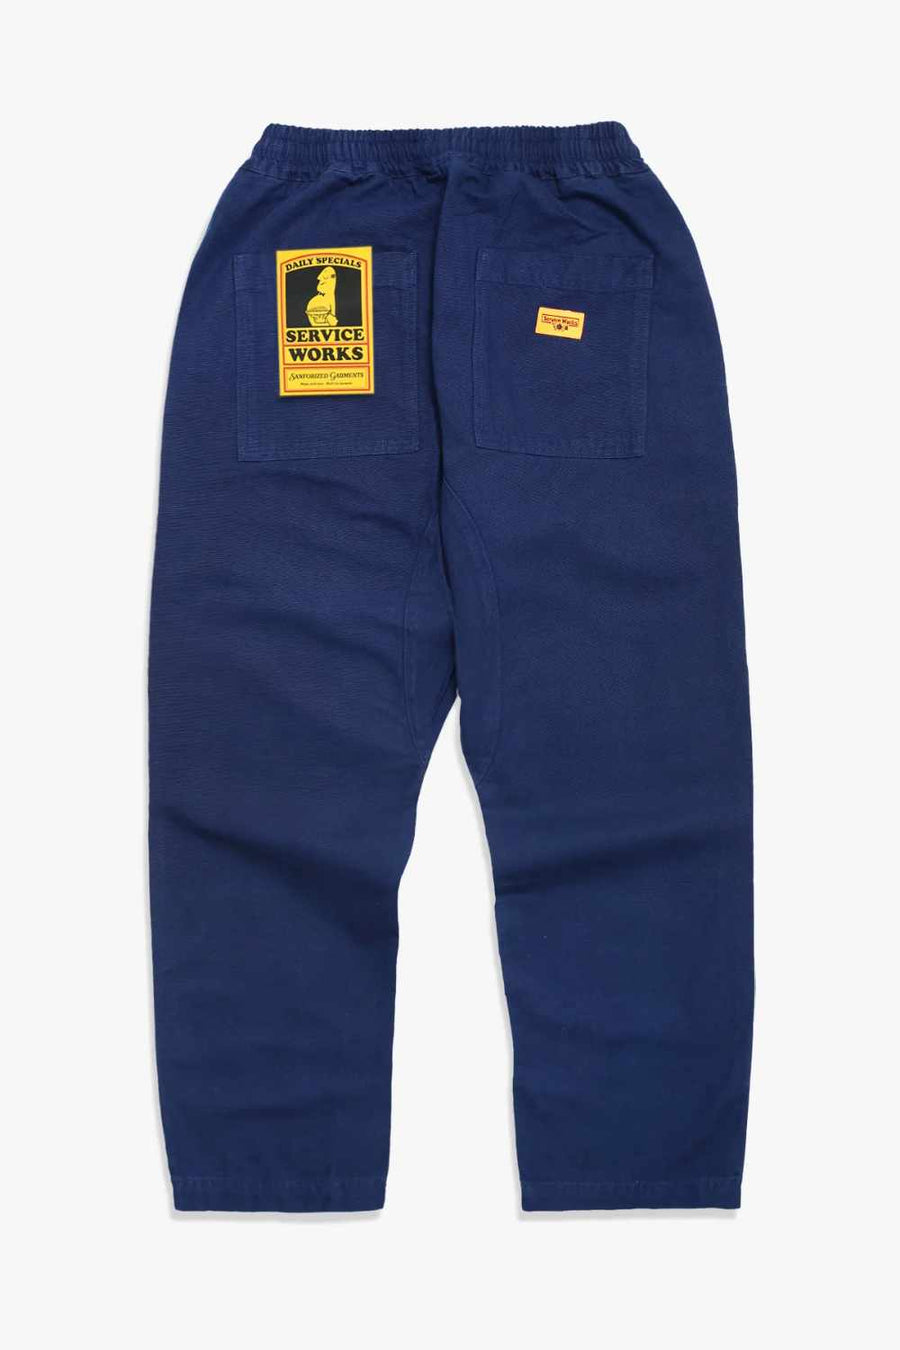 service works classic chef pants navy (LAST SIZE XLARGE)